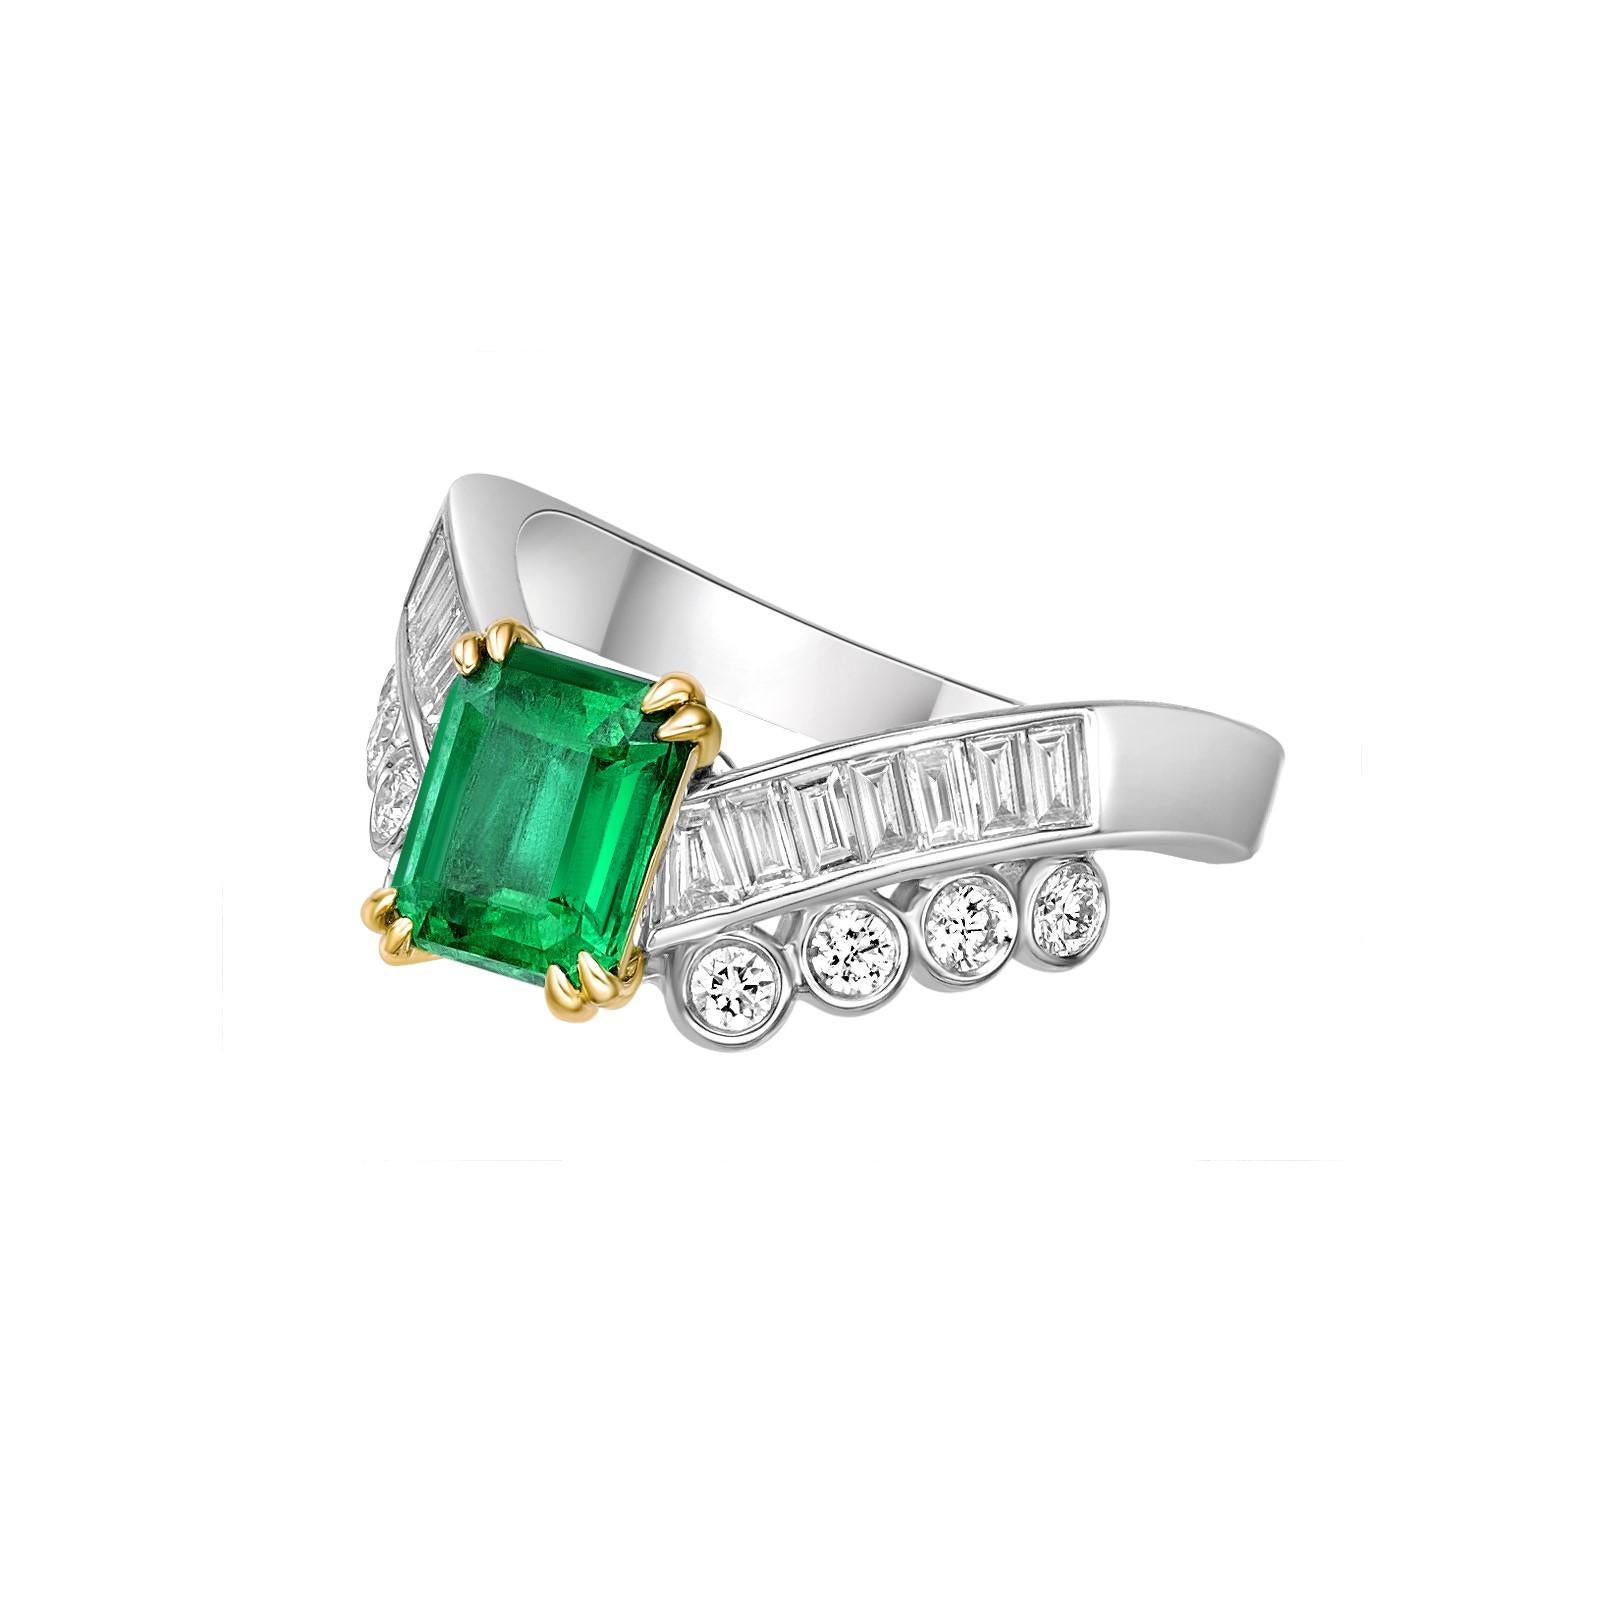 Octagon Cut 1.15 Carat Emerald Fancy Ring in 18Karat White Yellow Gold with White Diamond. For Sale